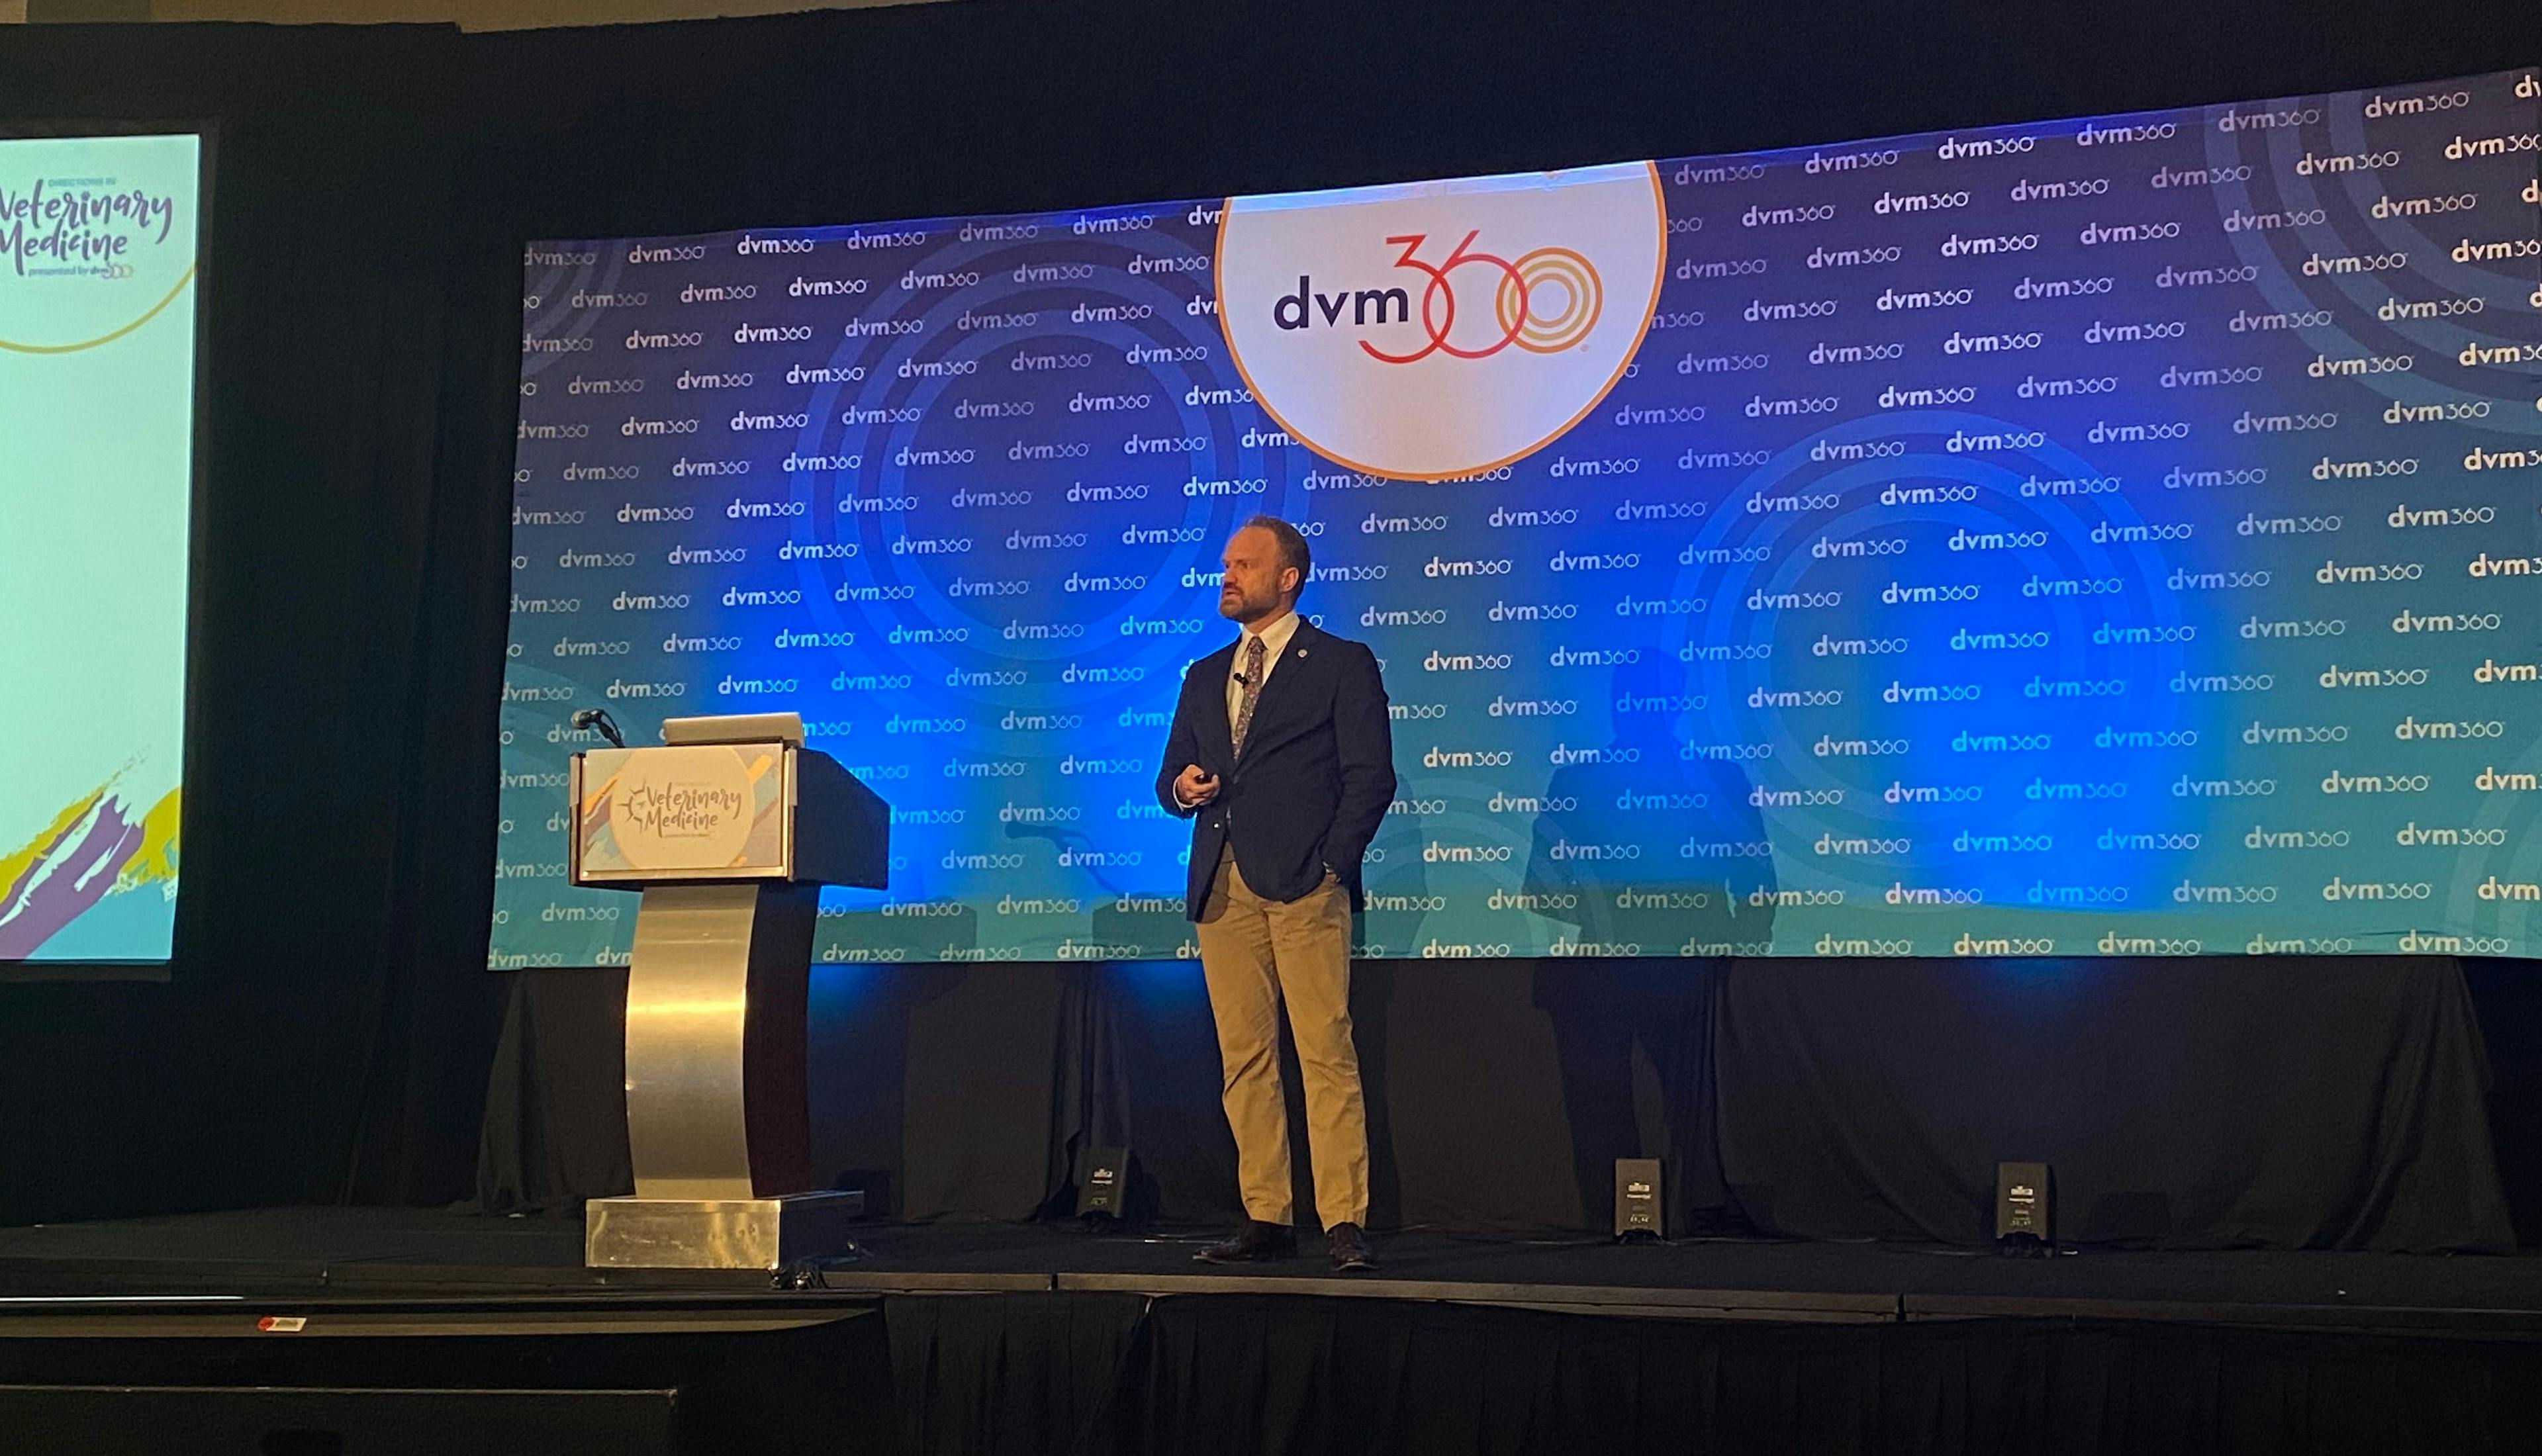 Credit: Sydney Yankowicz/dvm360®

Aaron Smiley, DVM, presented the second keynote session at the dvm360® Directions in Veterinary Medicine Conference.